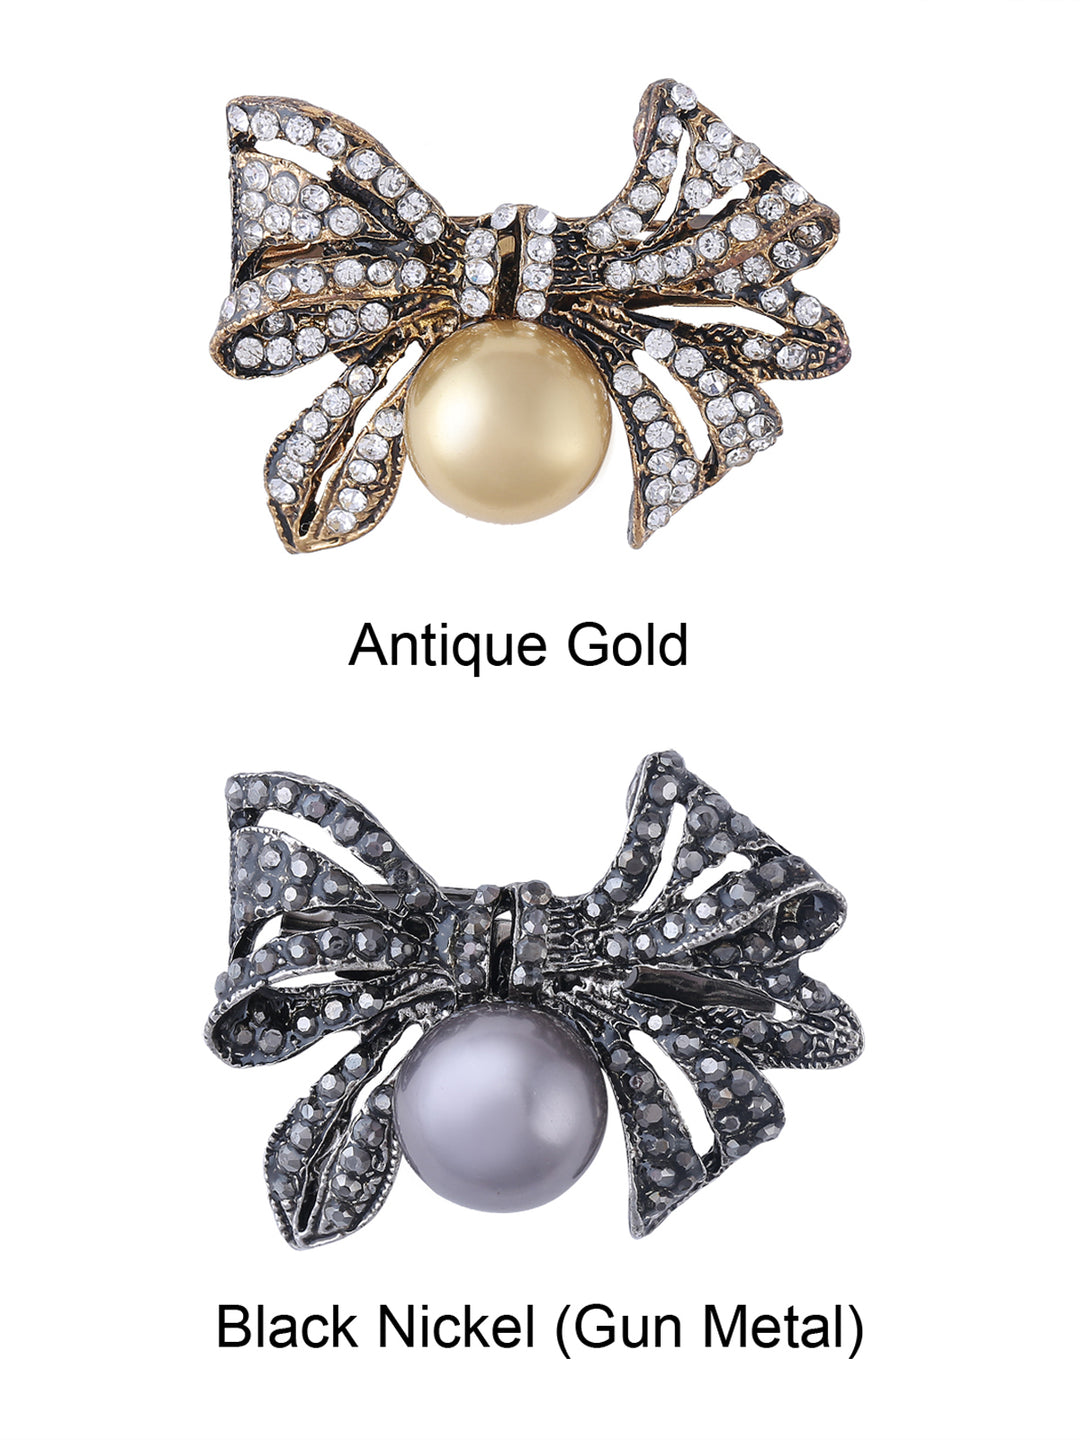 Bow-Knot Design Diamond And Pearl Exquisite Antique Gold & Black Nickel(Gun Metal) Brooch Pin